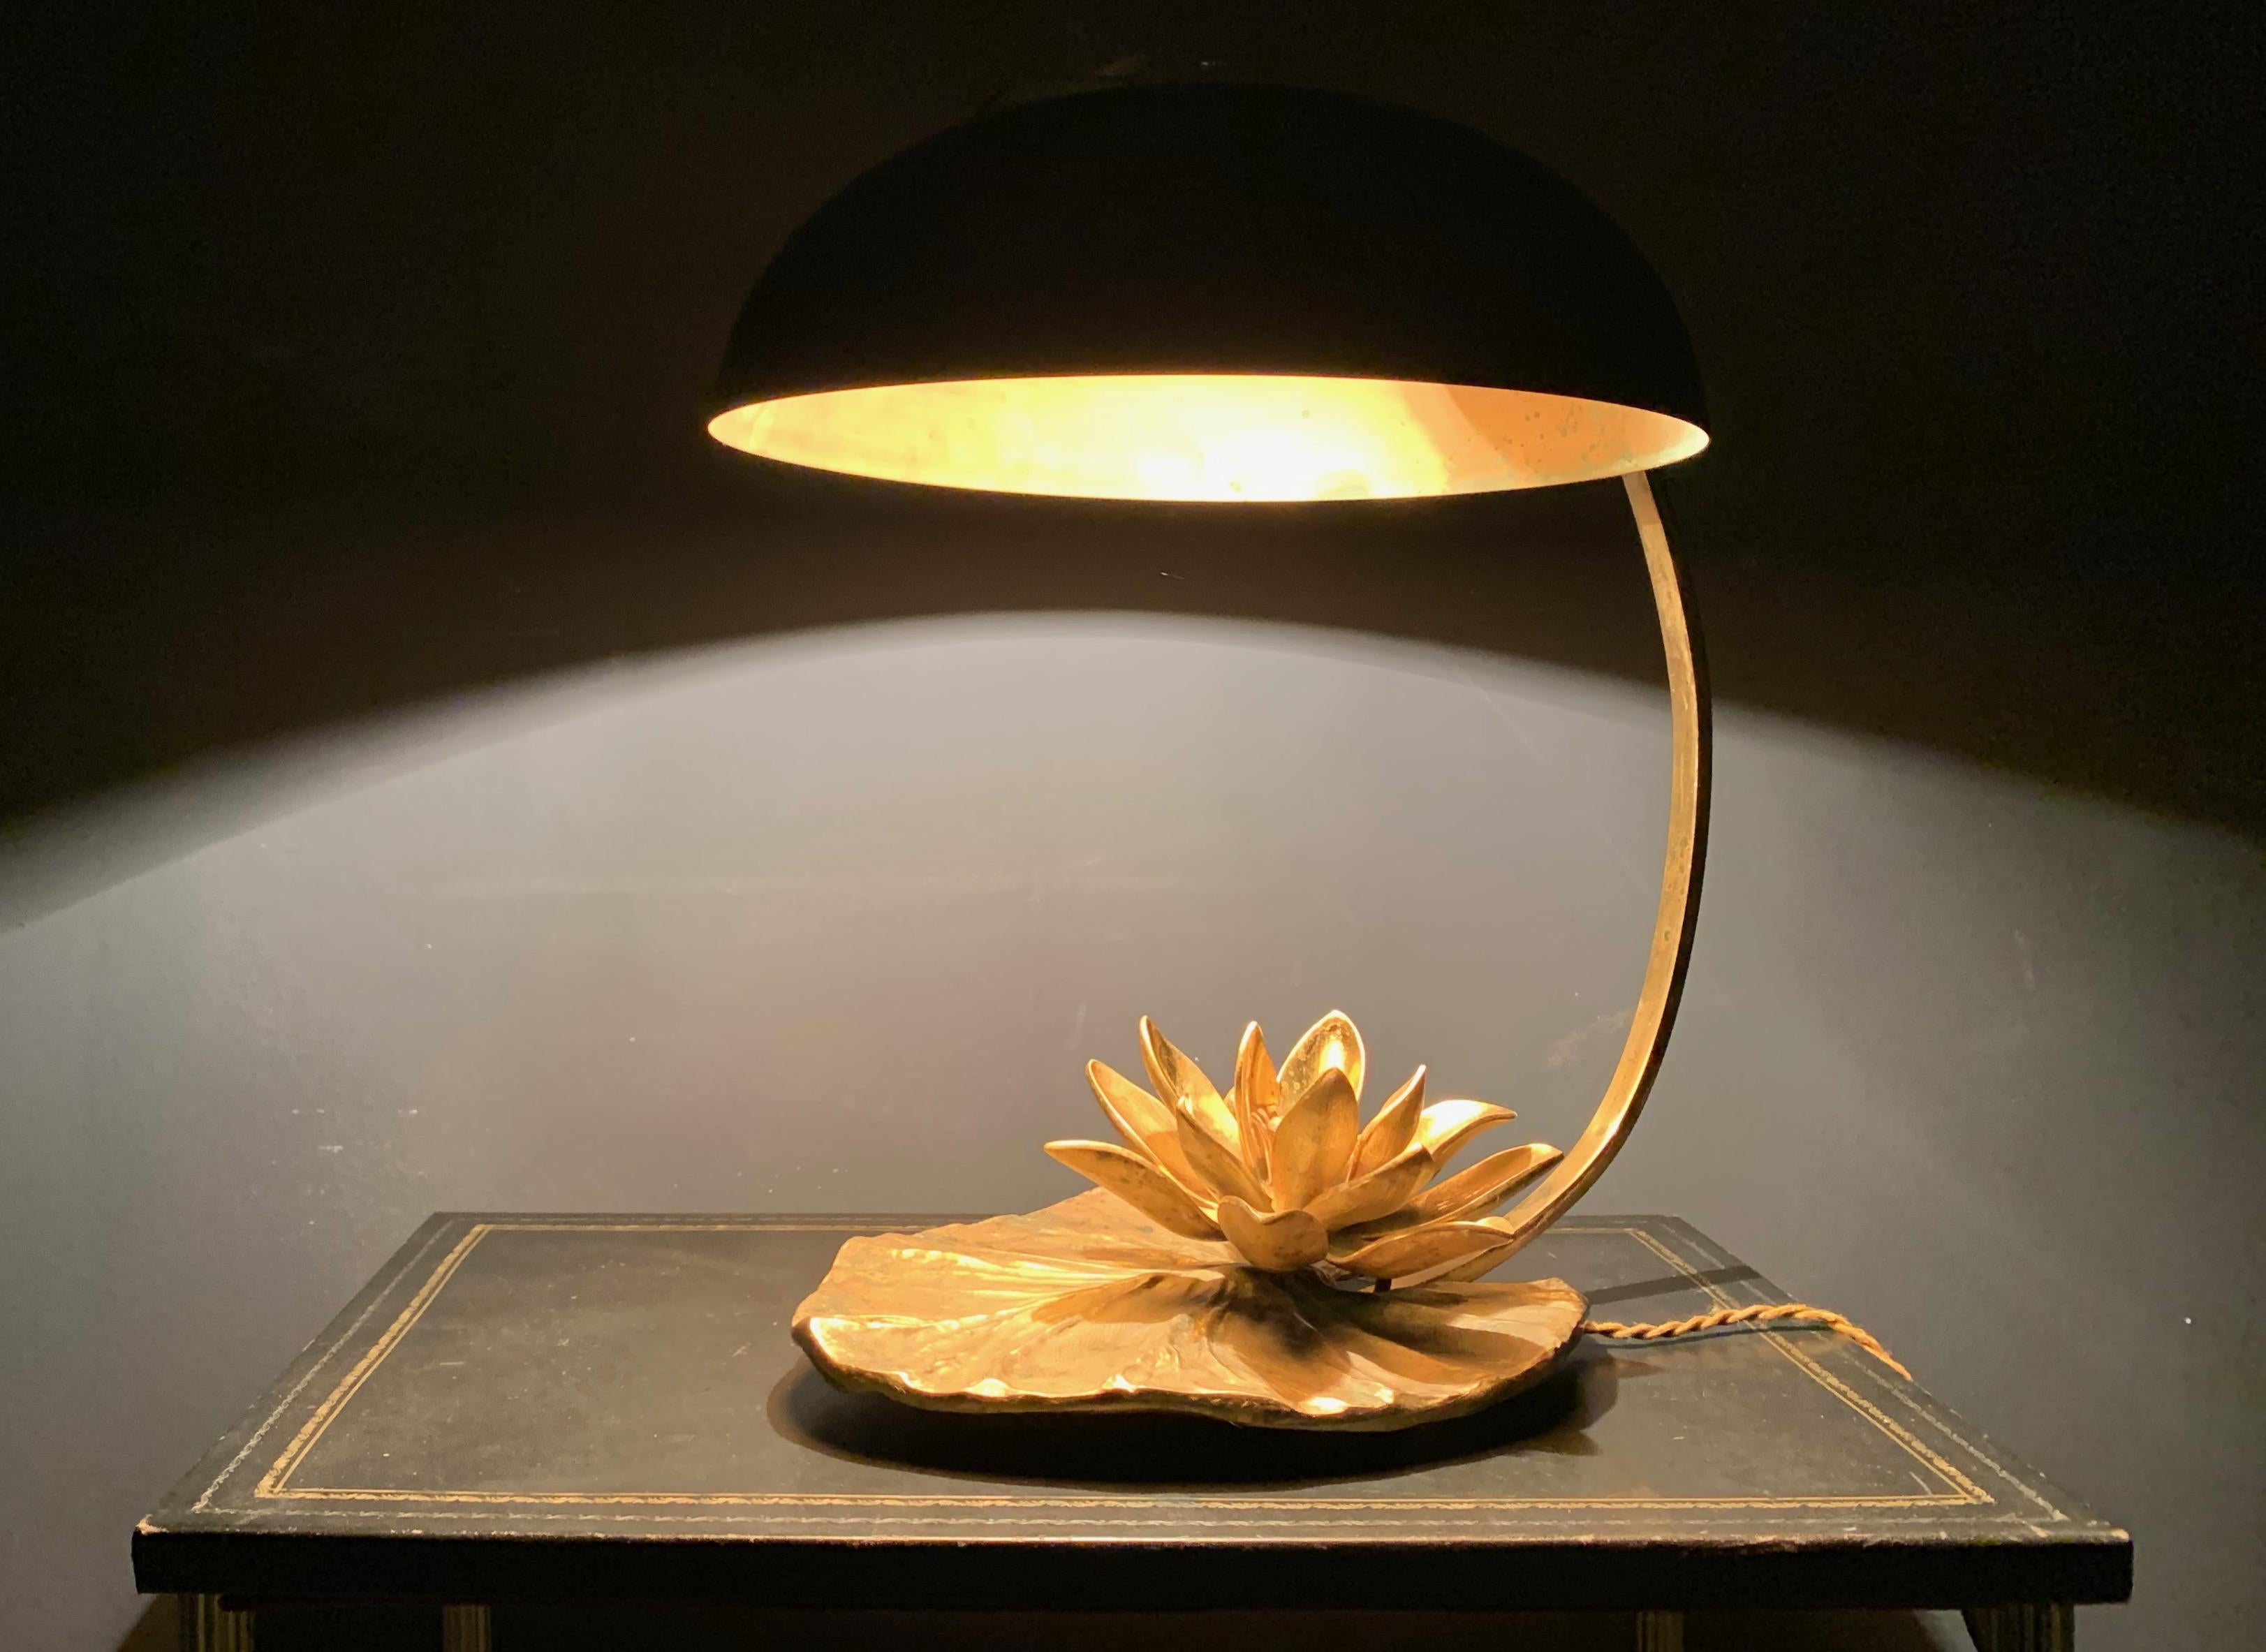 Amazing Water Lily / Nenuphar Table Lamp with Crazy Patina For Sale 3